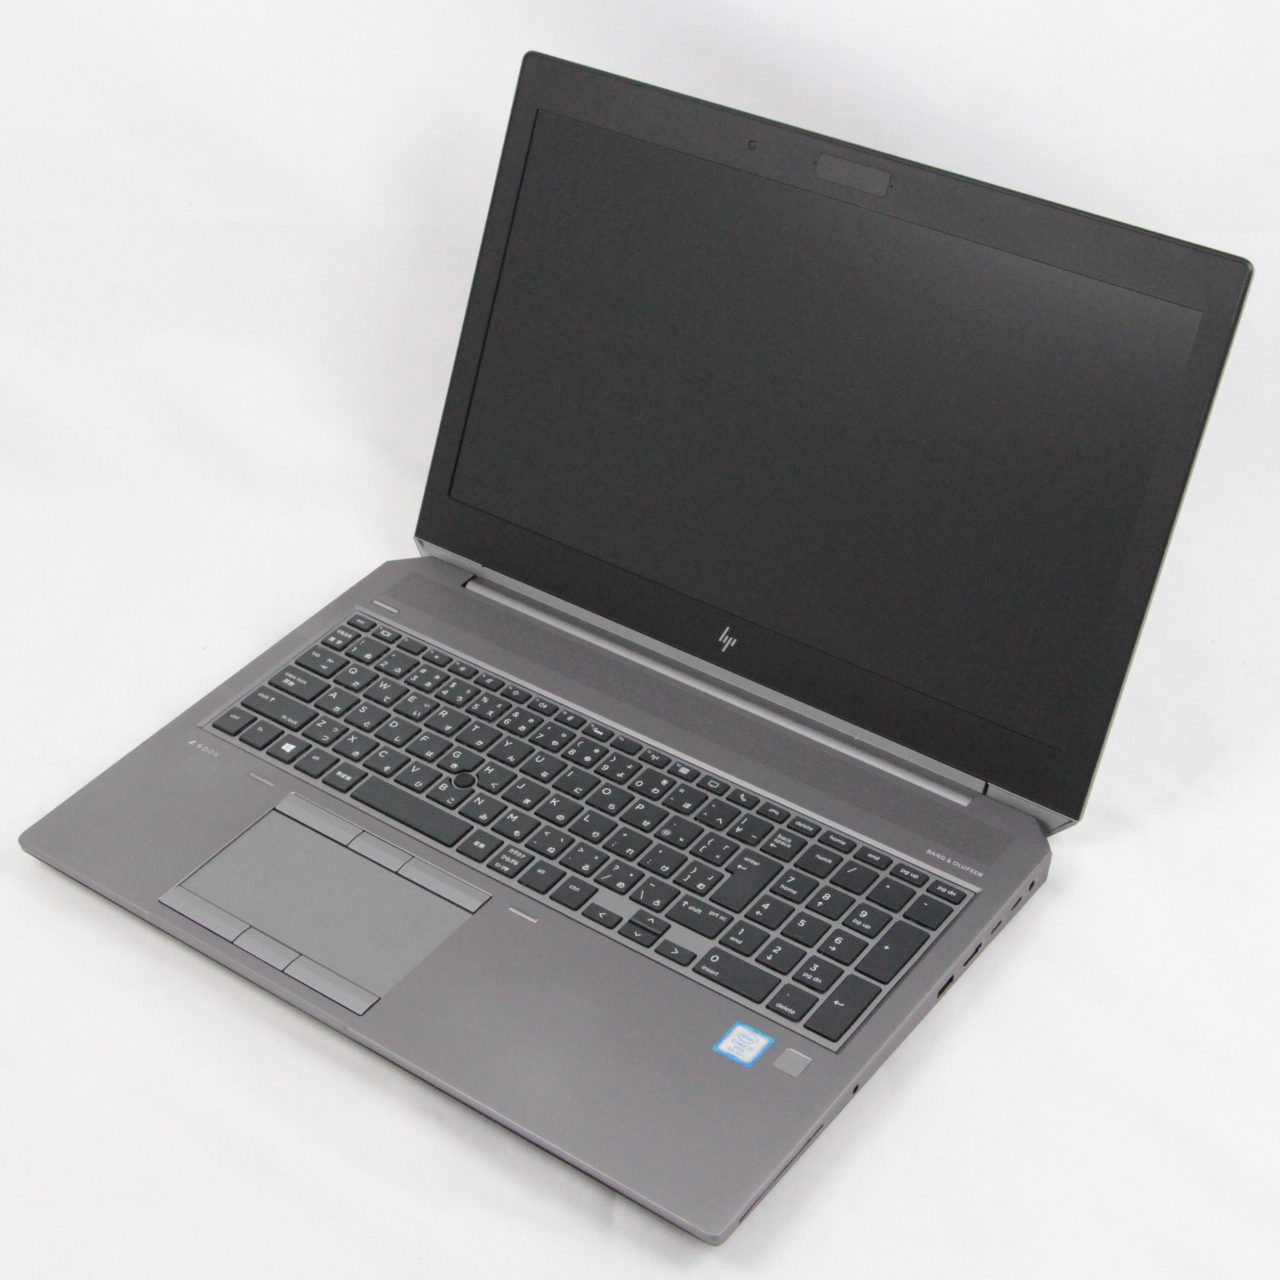 ZBook 15 G5 Mobile Workstation / 15.6インチ / 6C Core i7-8850H / 2.6GHz / 16GB / SSD 512GB